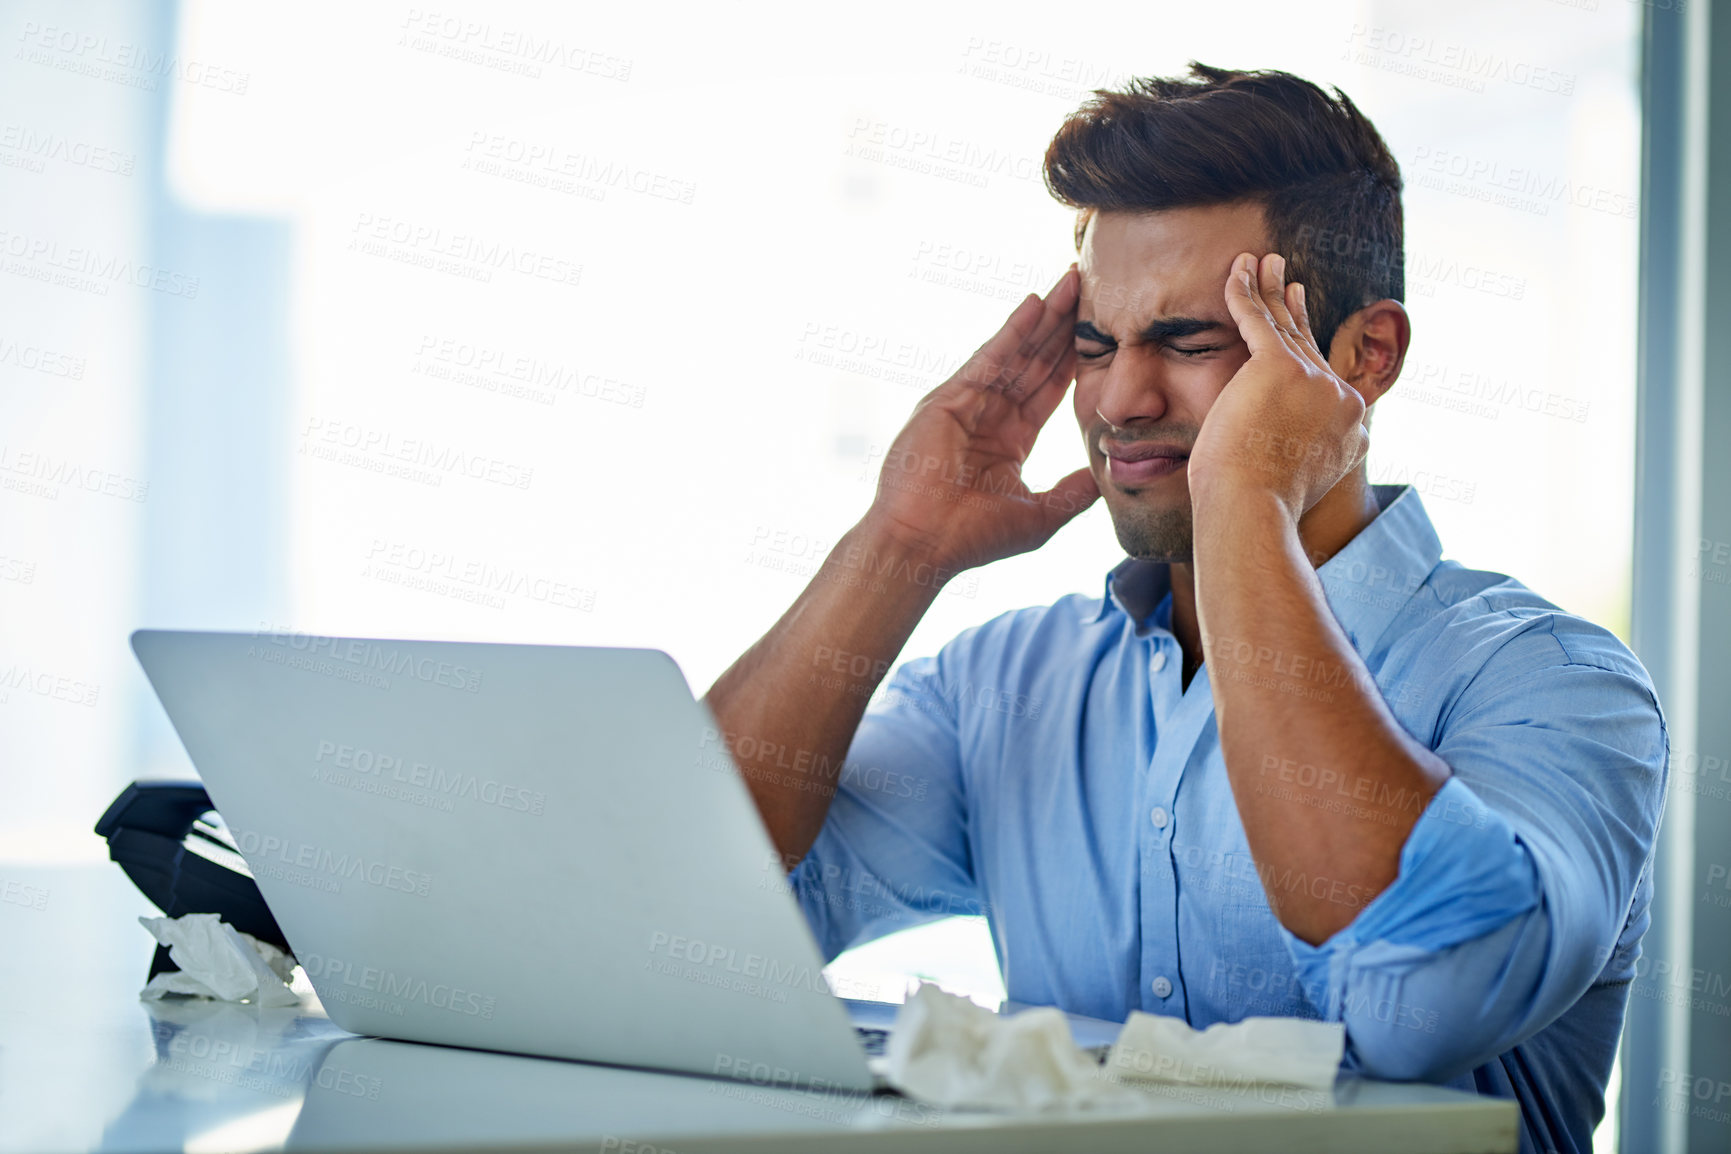 Buy stock photo Shot of a young businessman suffering with a headache at work